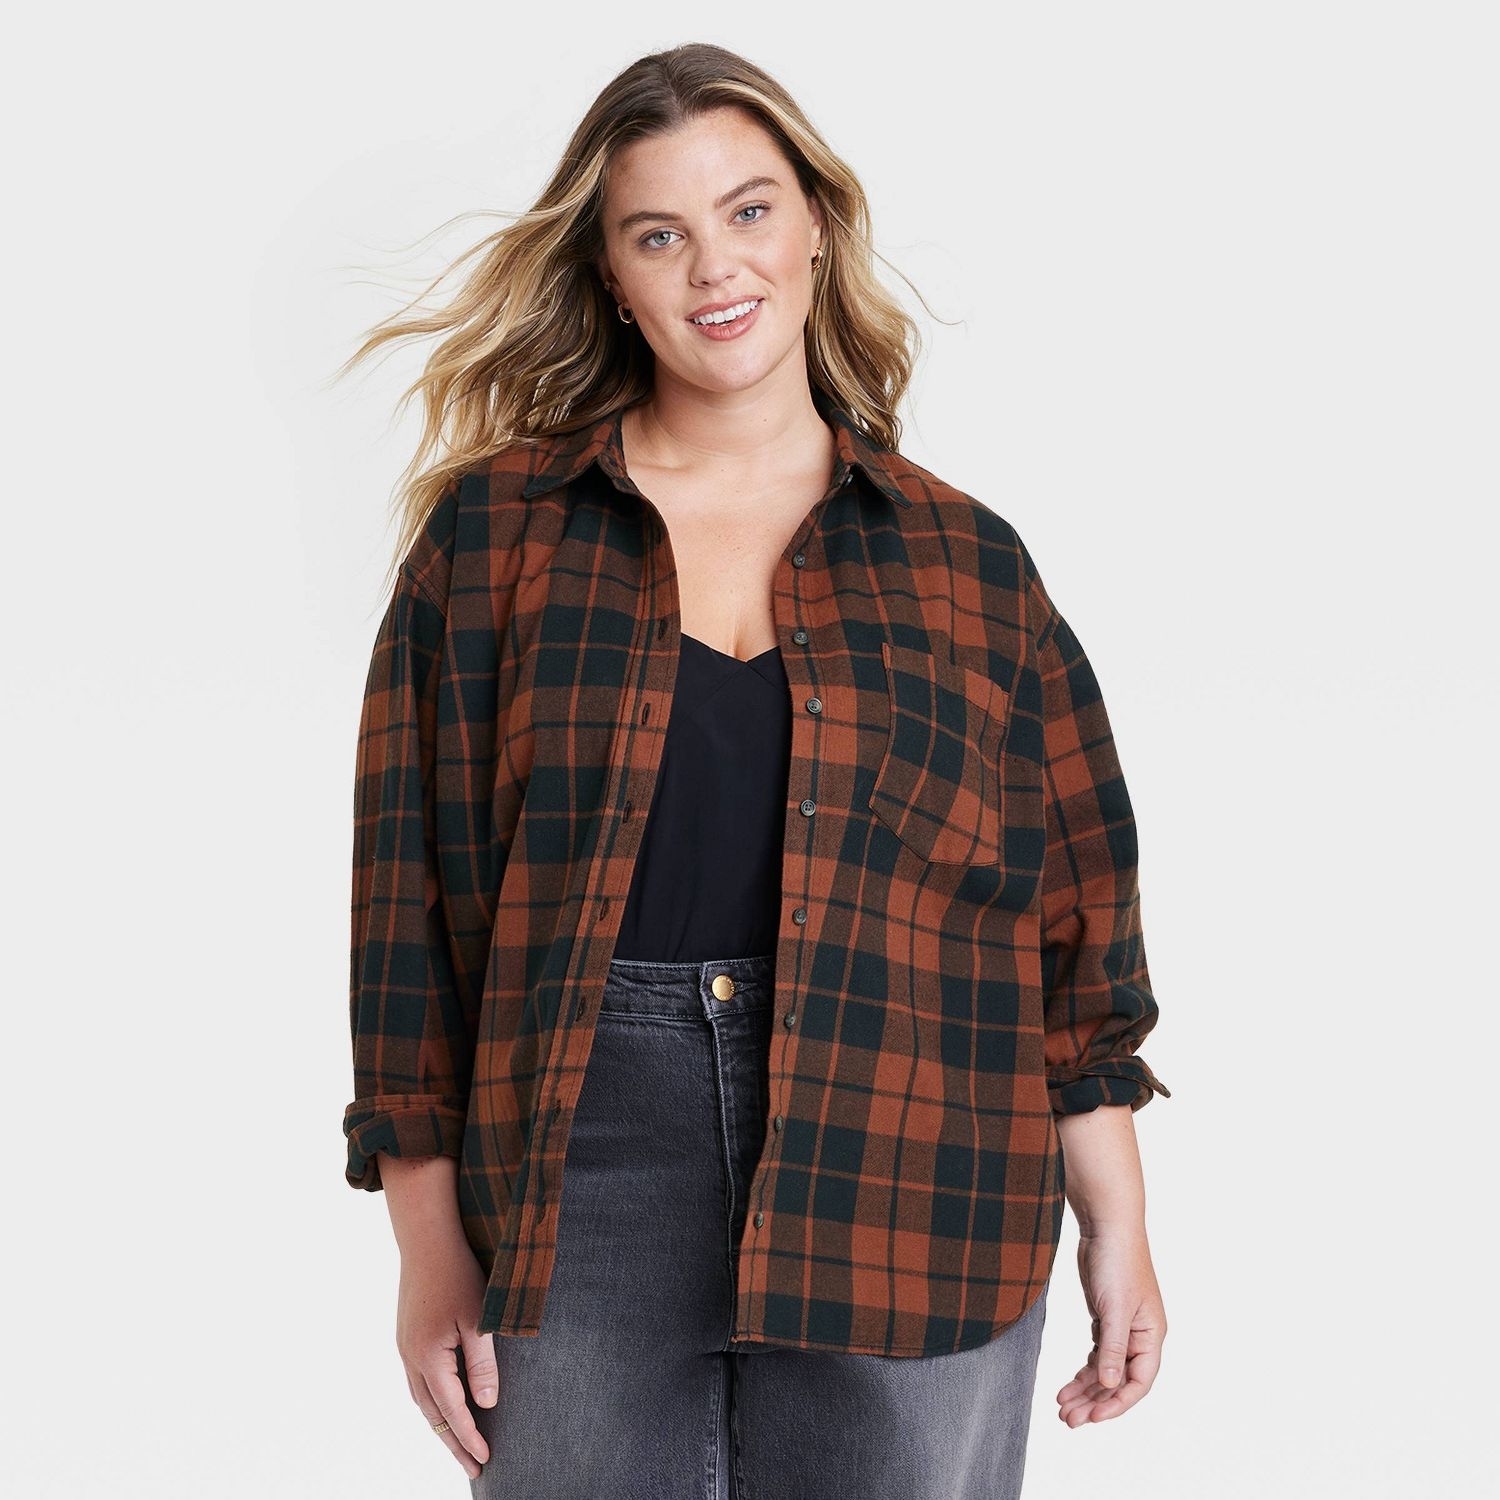 A model wearing the flannel in brown plaid